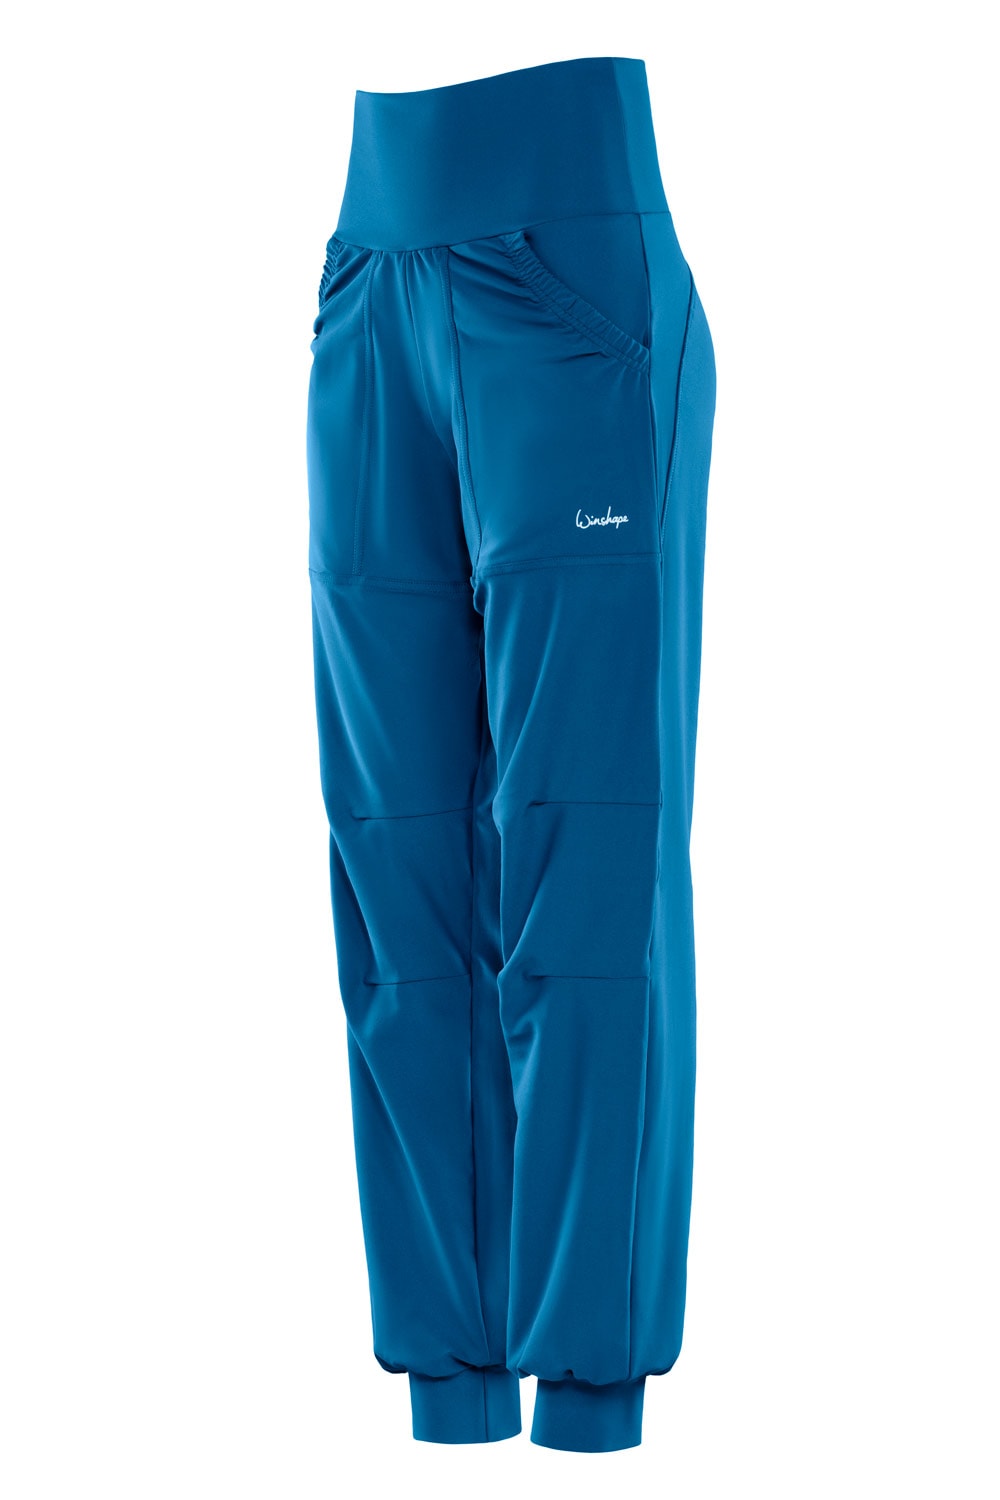 Leisure Waist Sporthose Comfort LEI101C«, online Time Winshape »Functional Trousers bei High OTTO